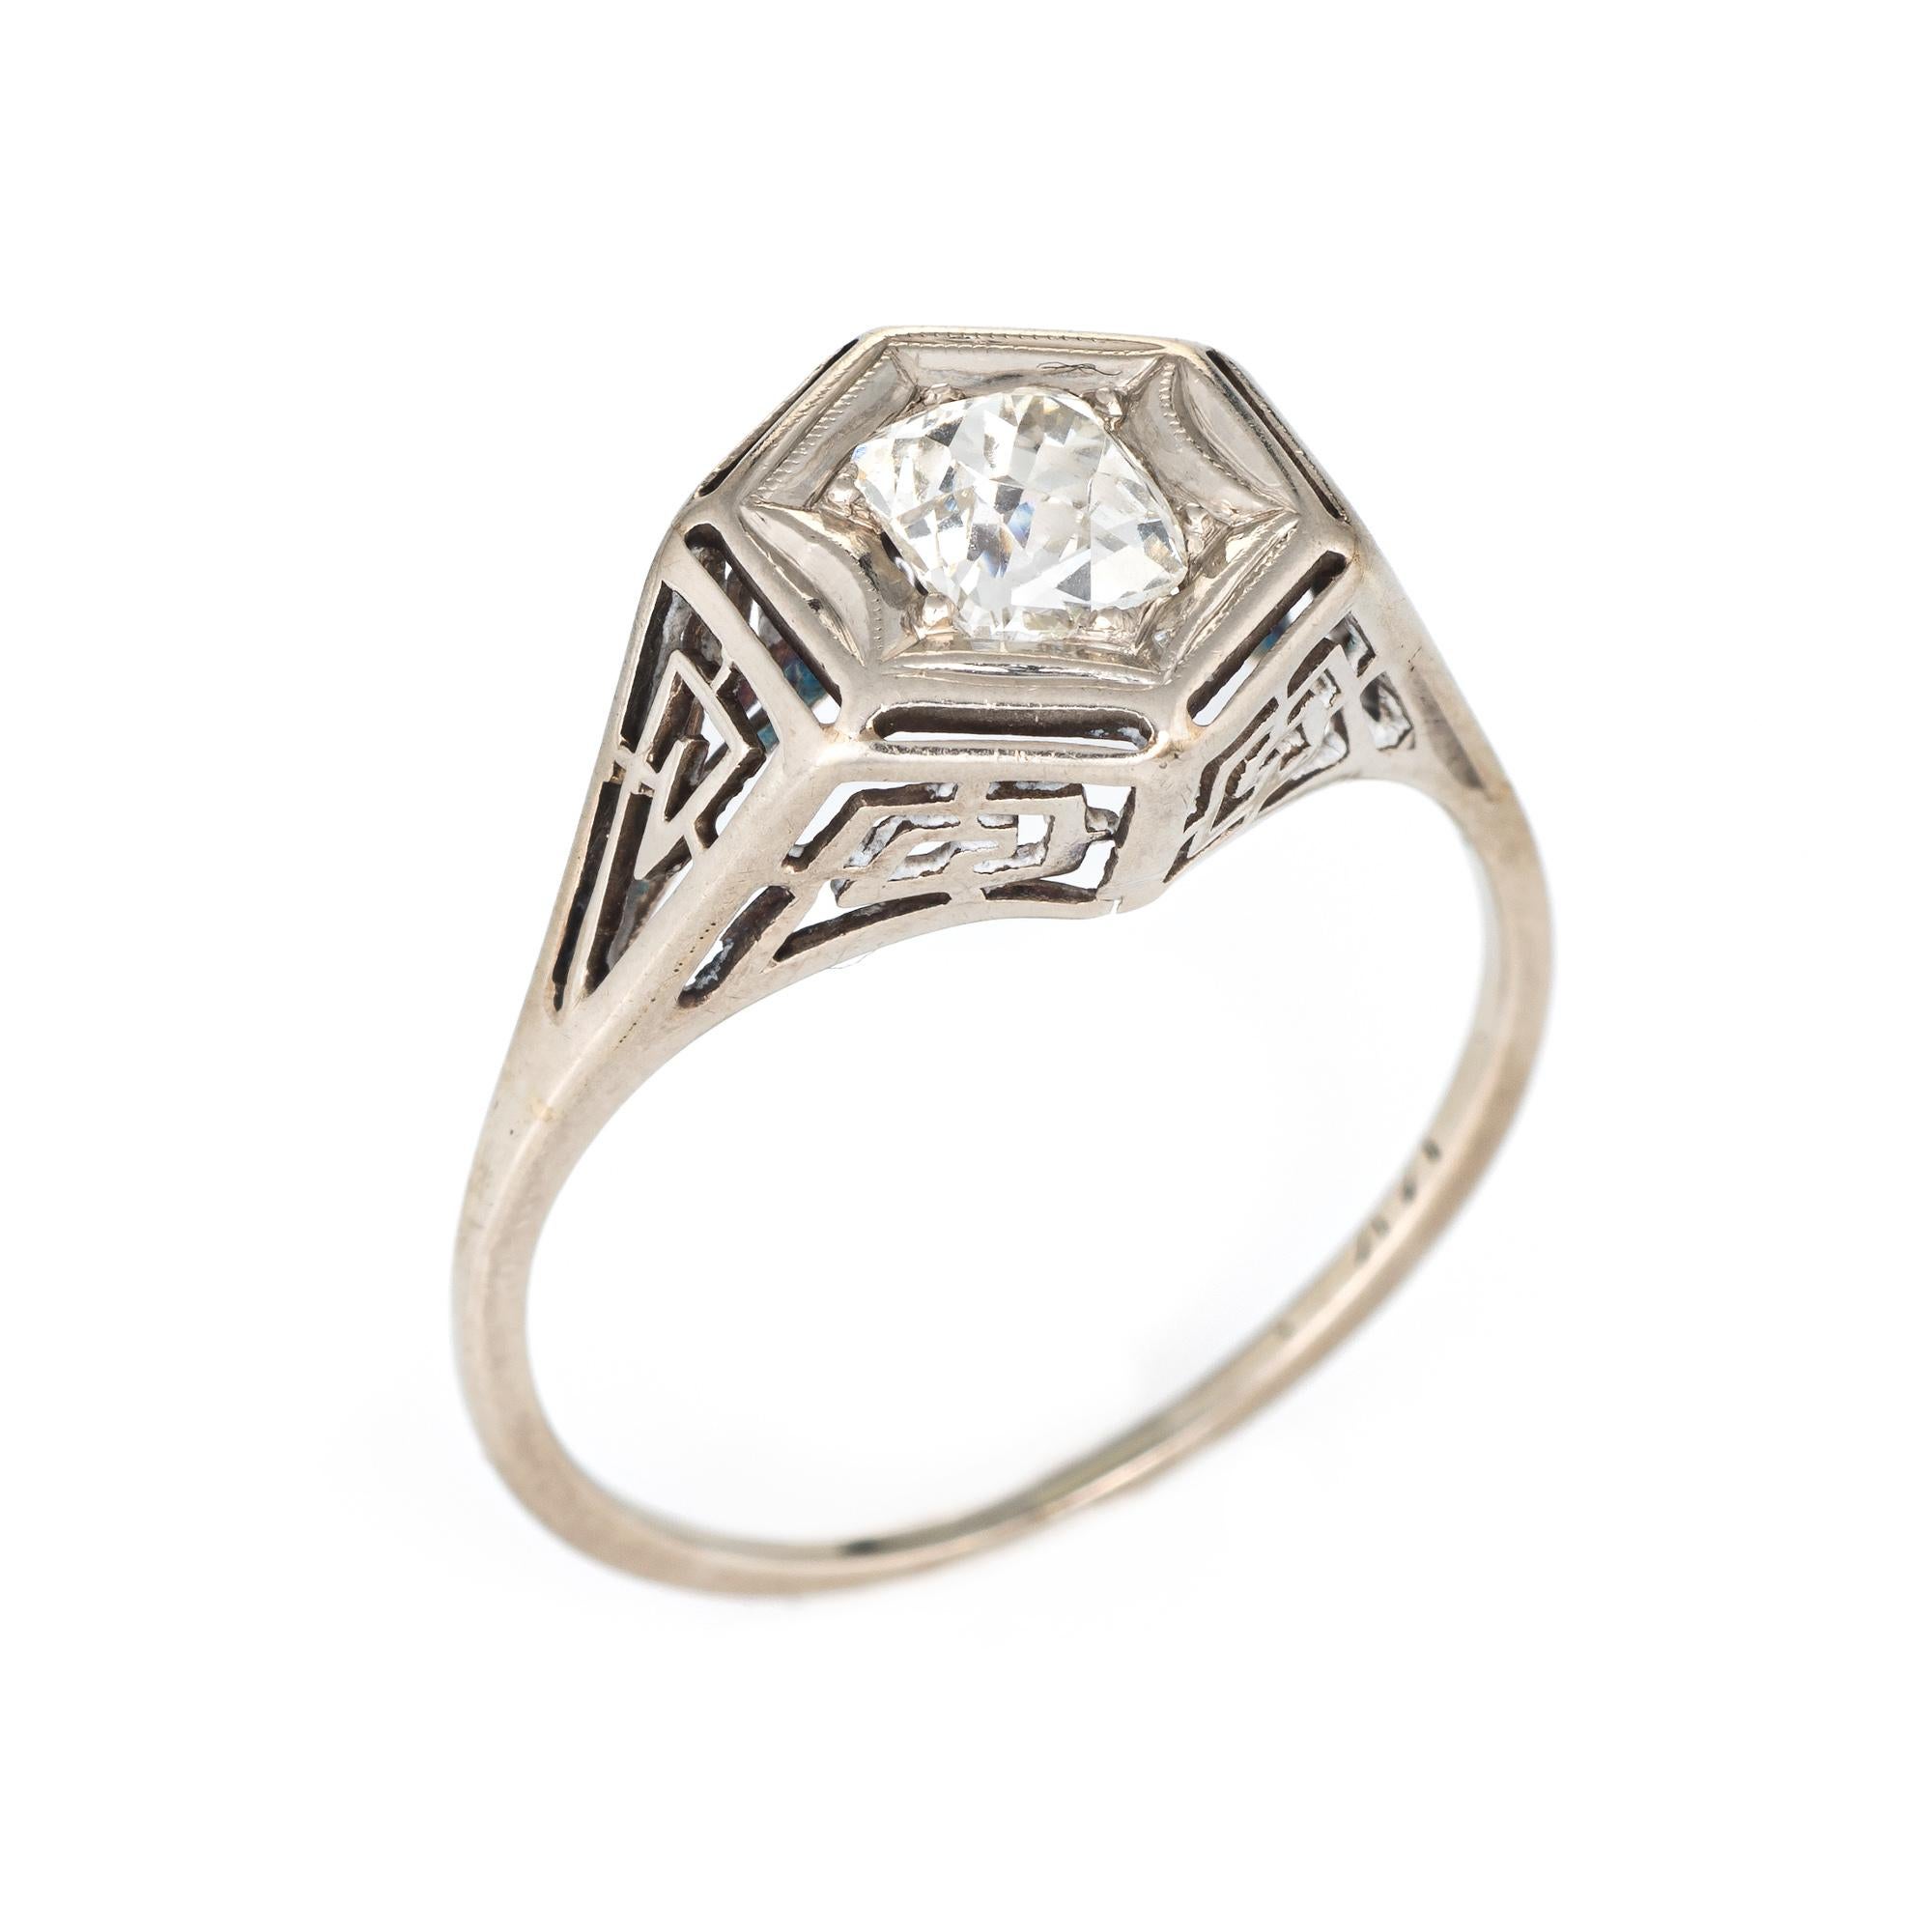 Finely detailed vintage Art Deco era ring (circa 1920s to 1930s) crafted in 14 karat white gold. 

Centrally mounted estimated 1.35 carat old cushion cut diamond (estimated at J-K color and SI2 clarity).  

The ring features a hexagonal mount that